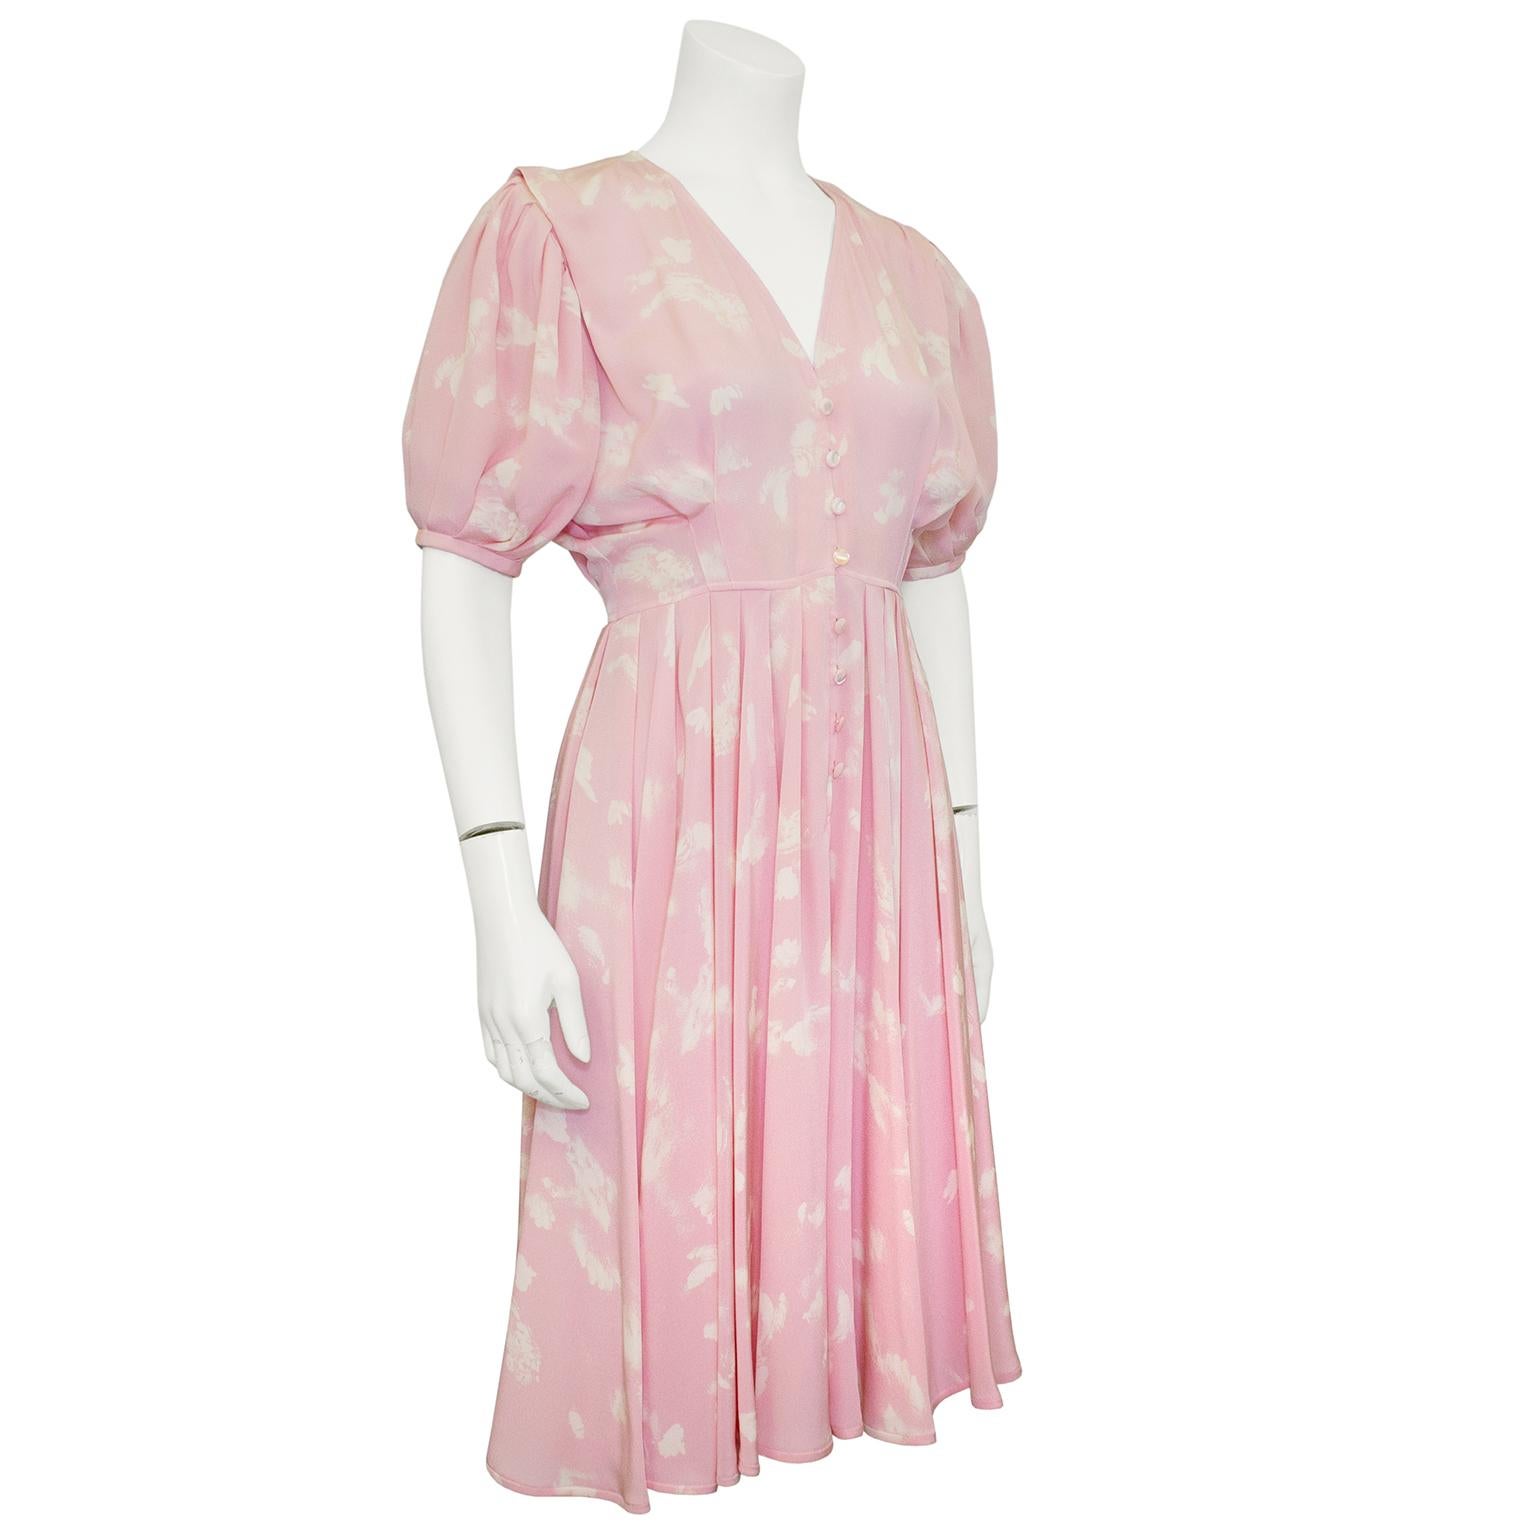 Very sweet Ungaro dress from the 1980s. Coral pink rayon crepe with all over cream coloured abstract splotches. V neckline with buttons down the centre seam. Pleated, gathered and draped short sleeves. Fitted through the waist. Loose, pleated skirt